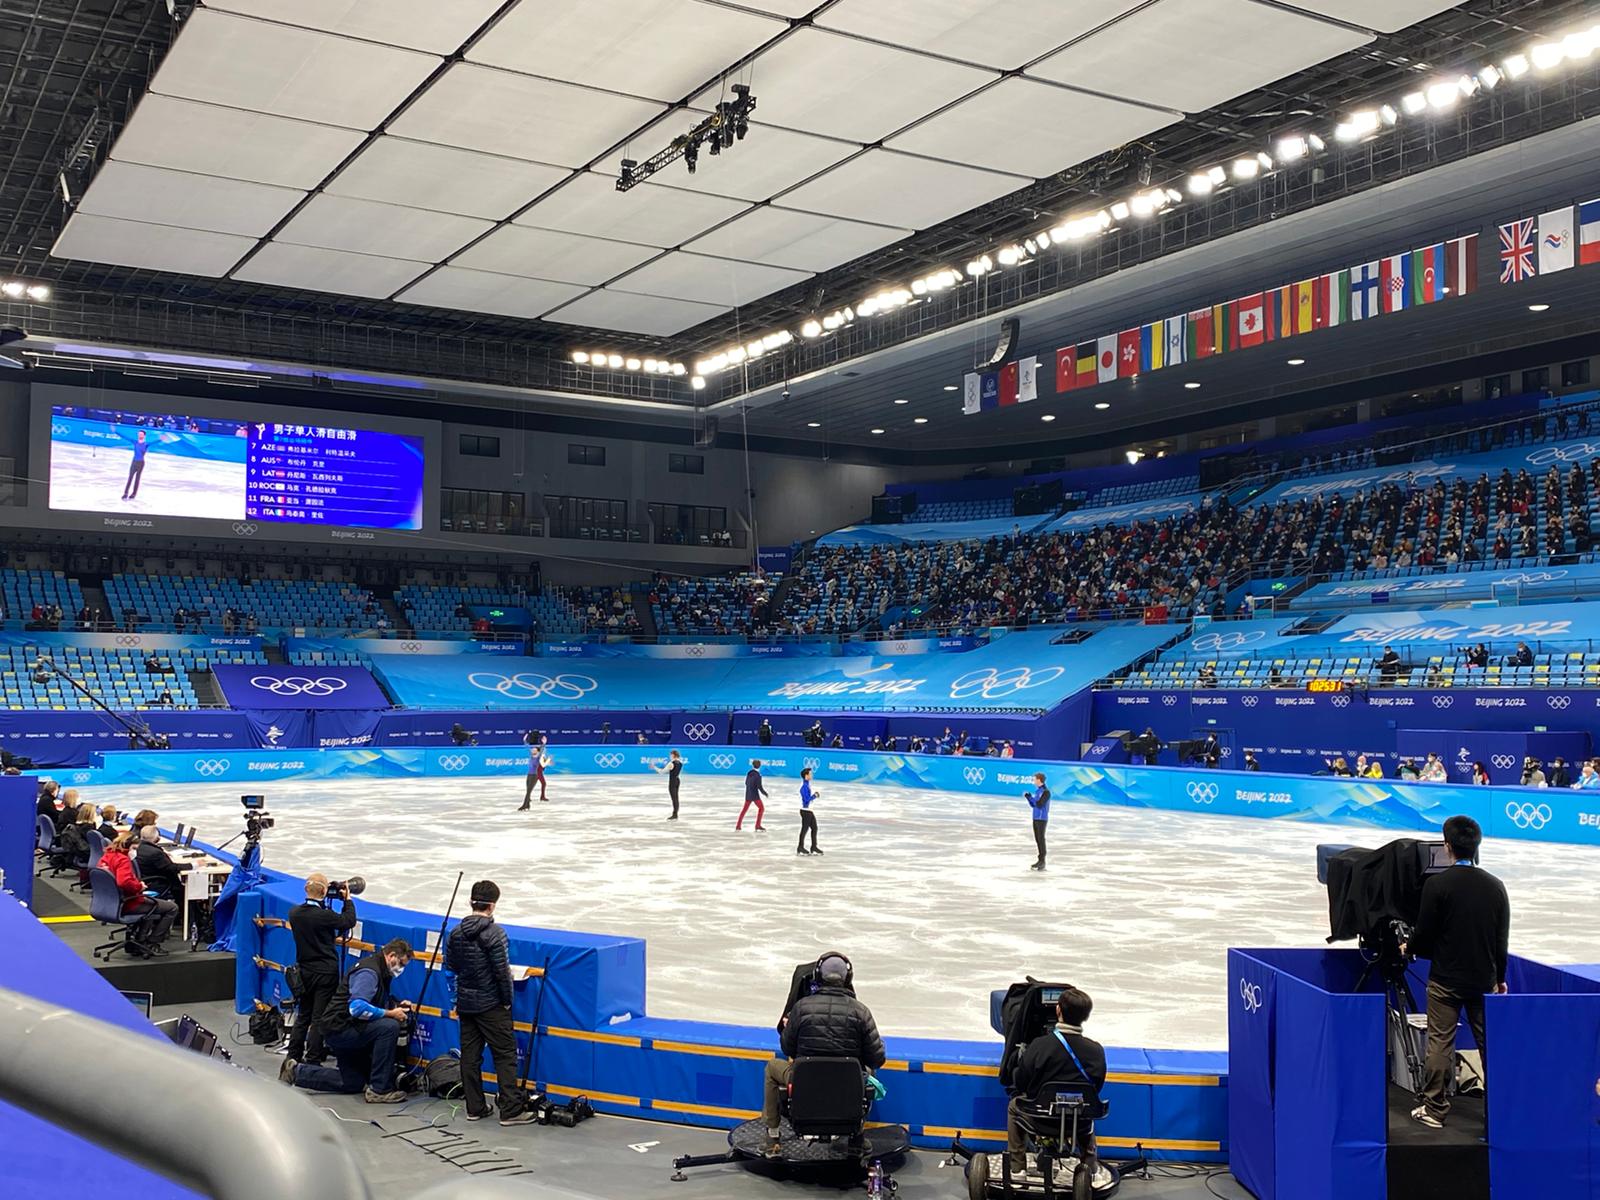 The Capital Indoor Stadium during the men's figure skating final on Thursday.